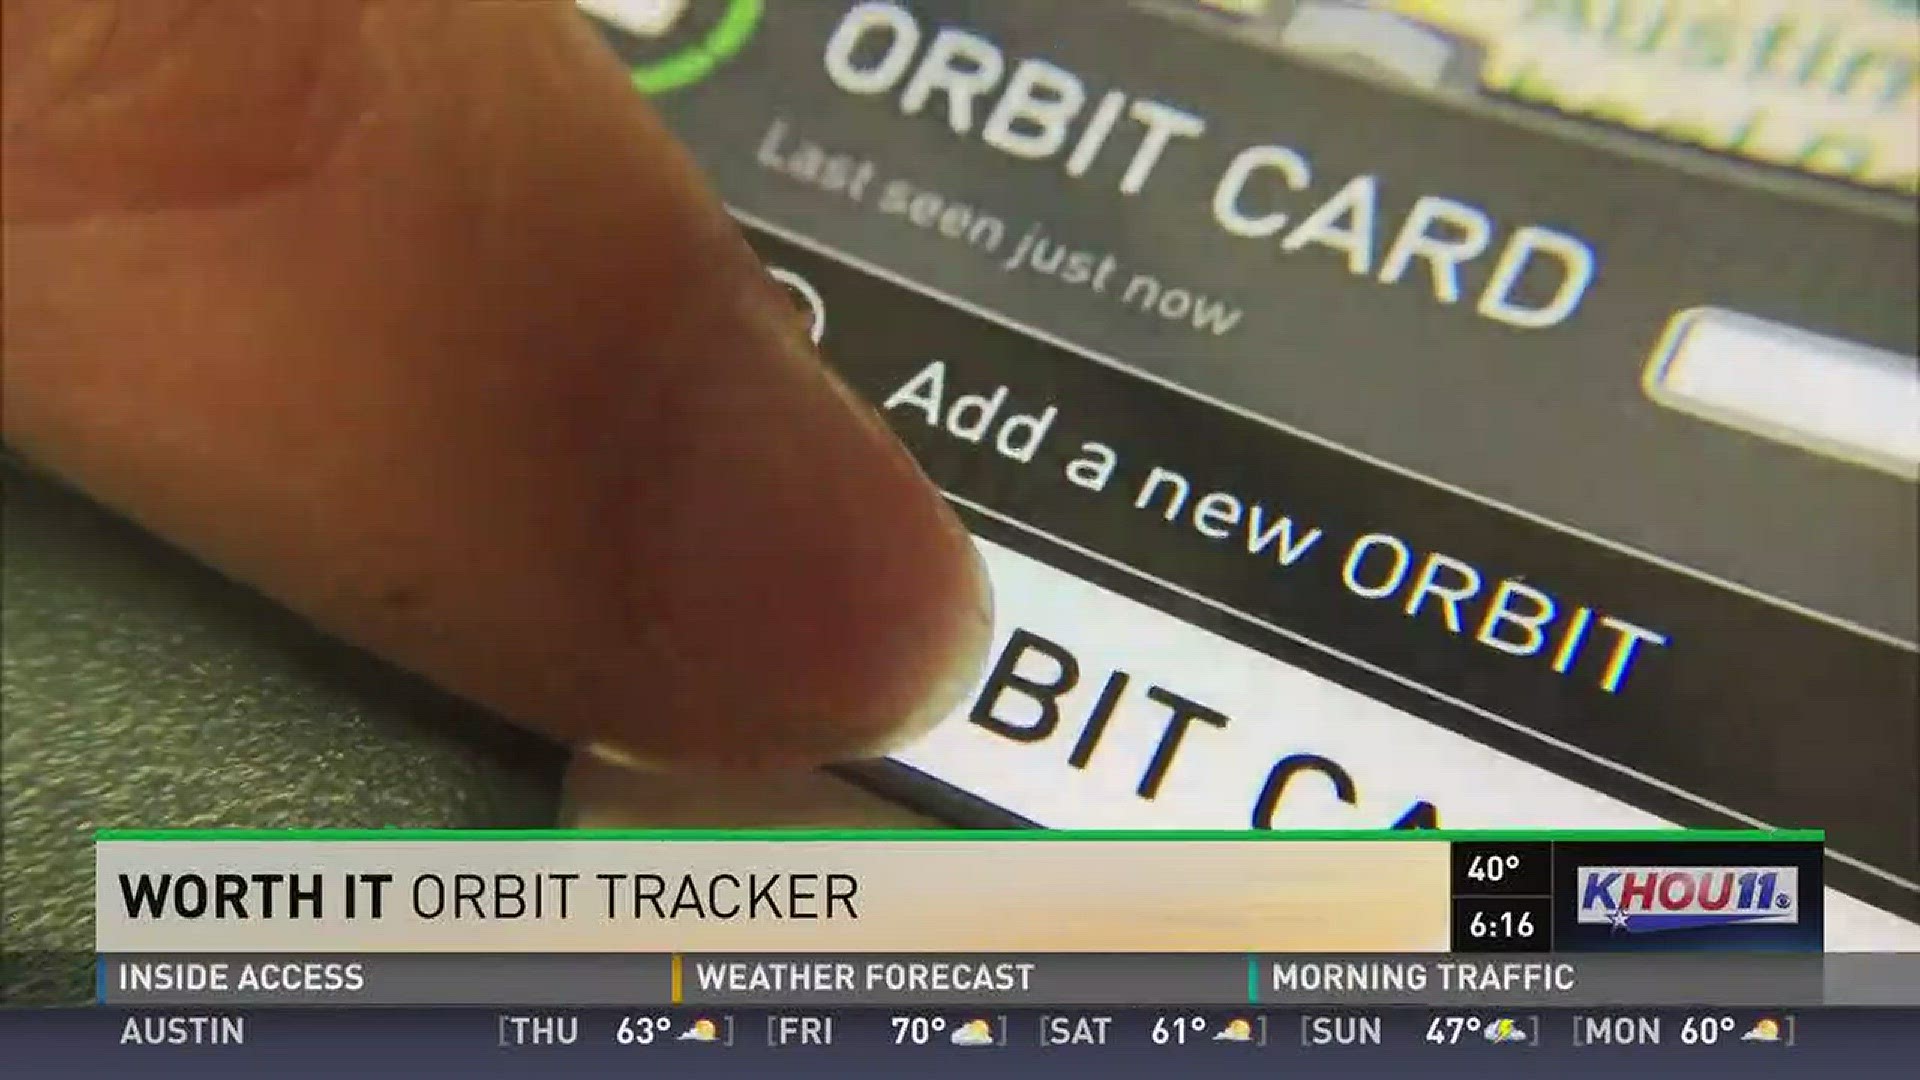 The Orbit Bluetooth Tracker claims to keep track of your phone and wallet - is it worth it? KHOU Consumer Reporter Tiffany Craig investigates.